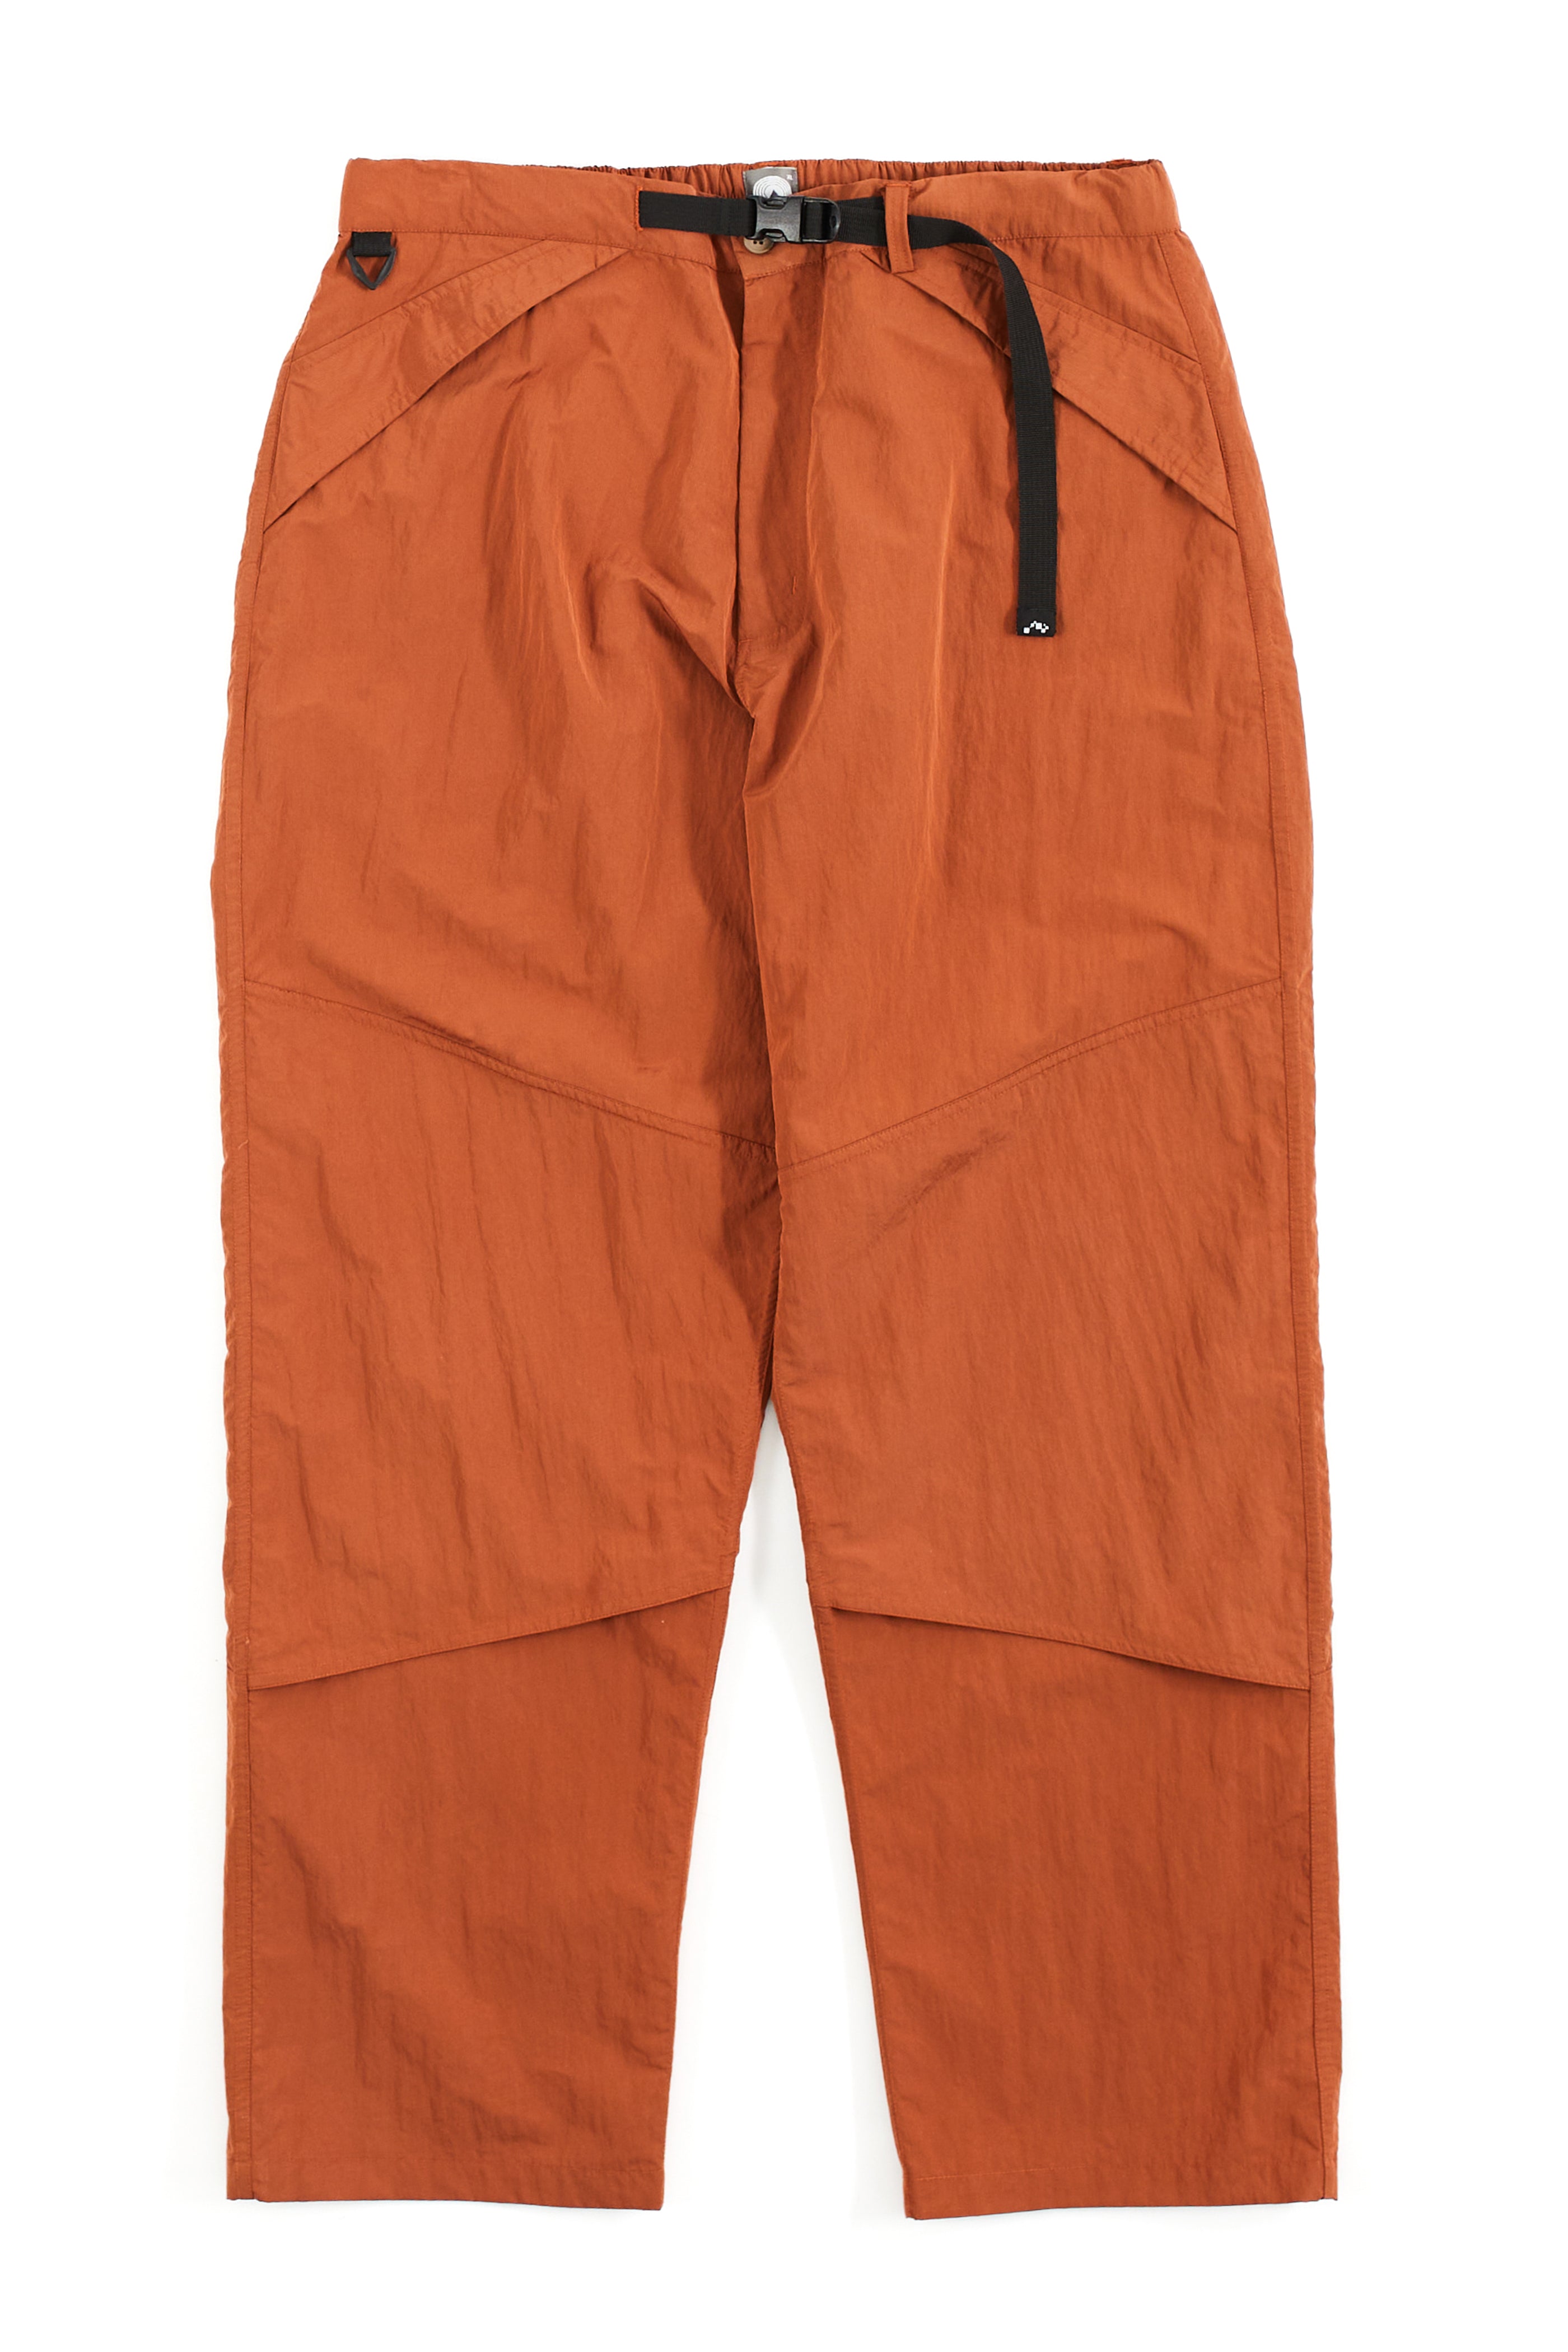 RAINSHADOW OUTDOOR PROTECTION SYSTEM TRAIL PANT - BRICK WATER-REPELLENT MICRO RIPSTOP NYLON